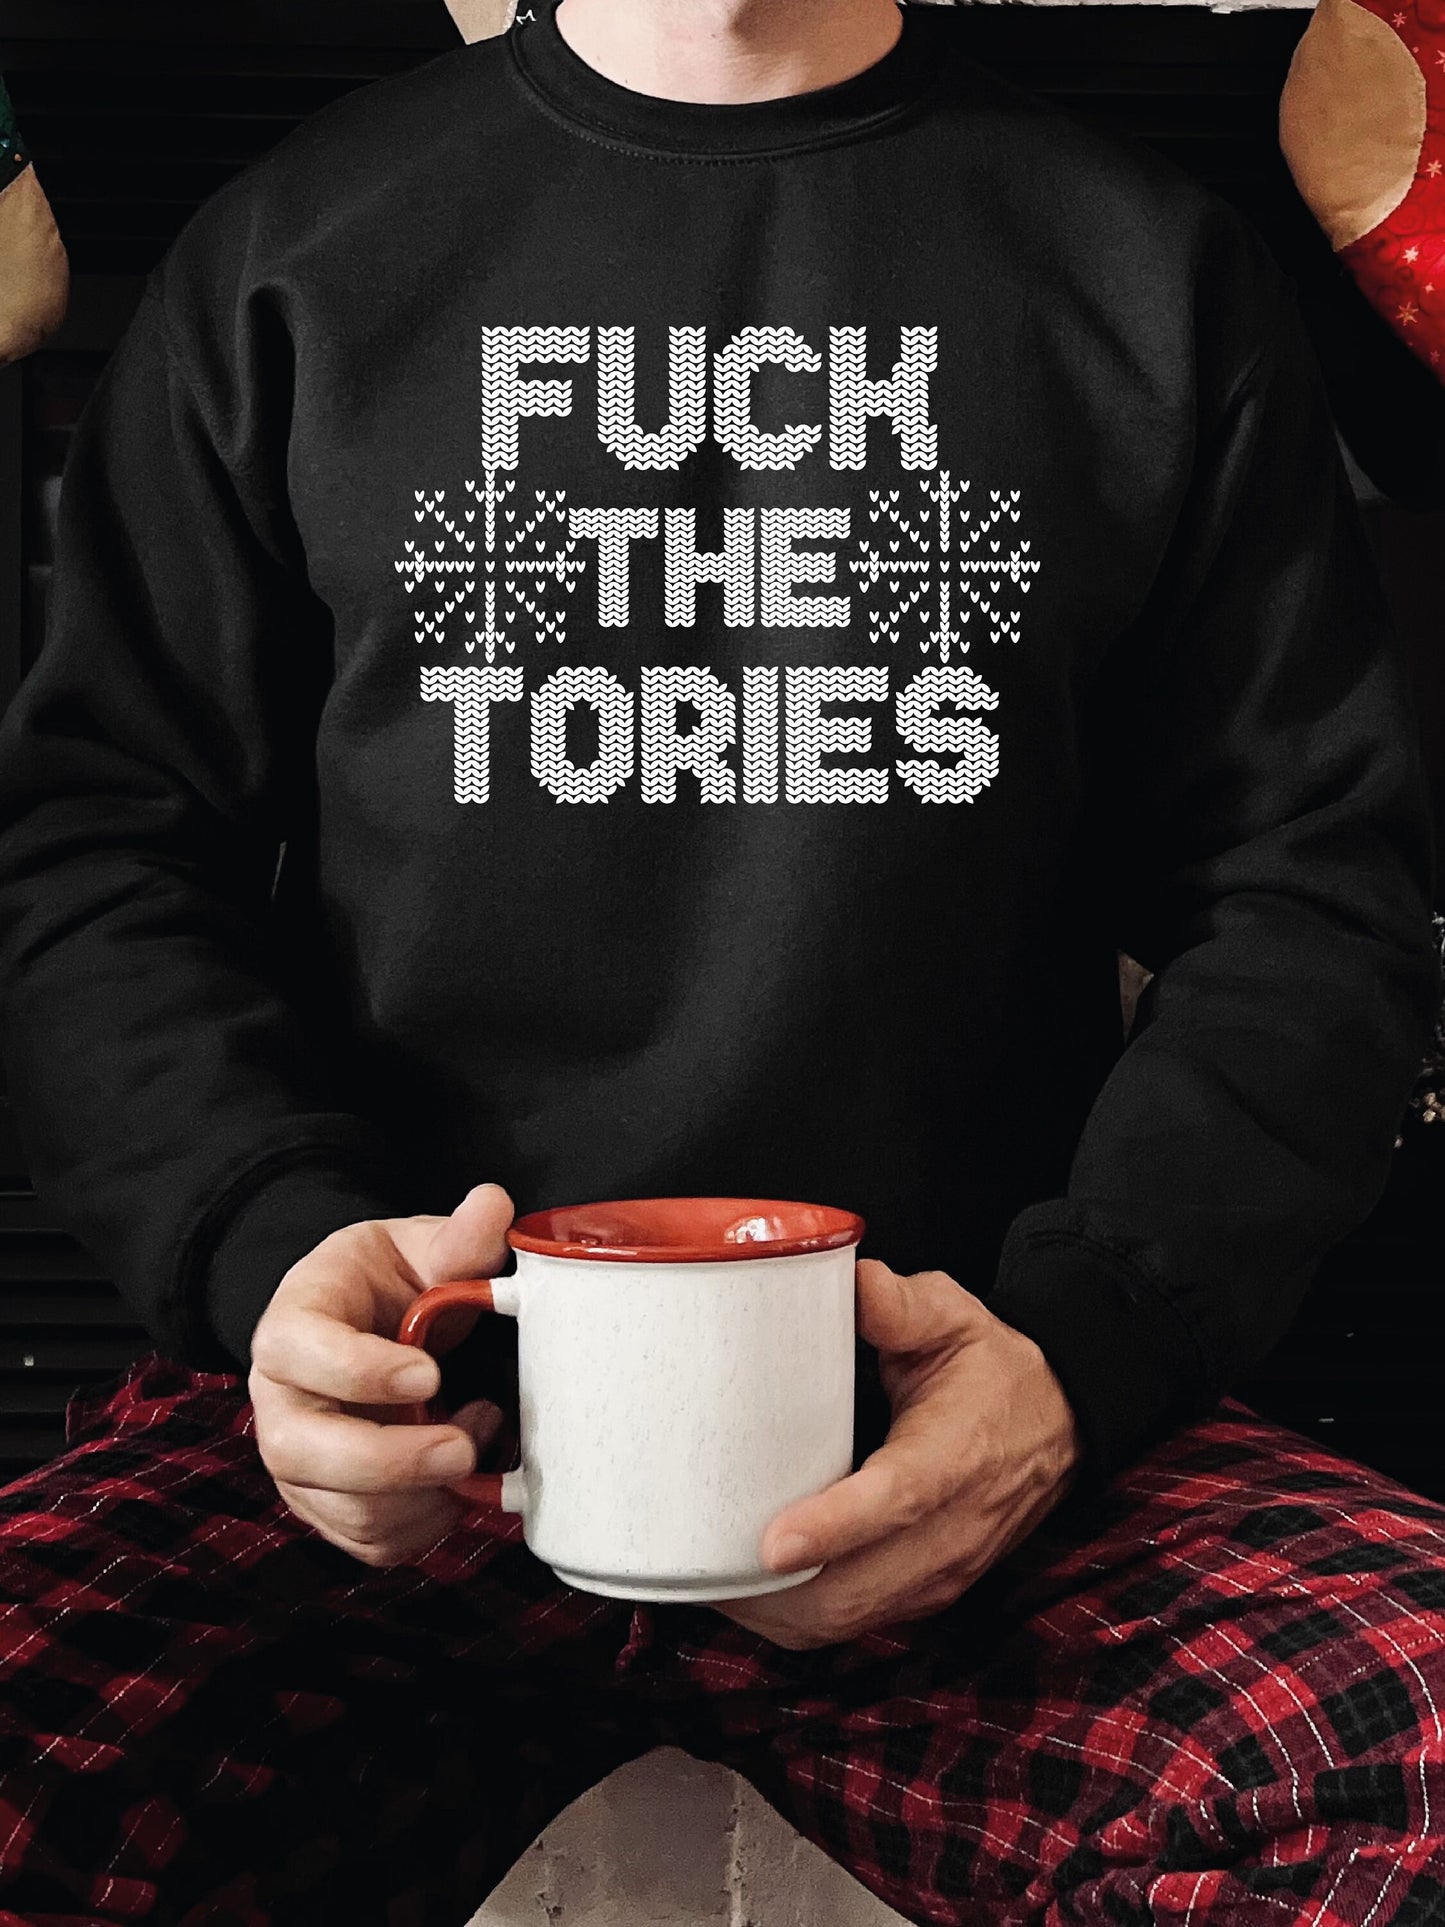 Christmas Jumper F*ck The Tories Sweatshirt, Christmas Knitted look font, funny Christmas sweater, Christmas gift